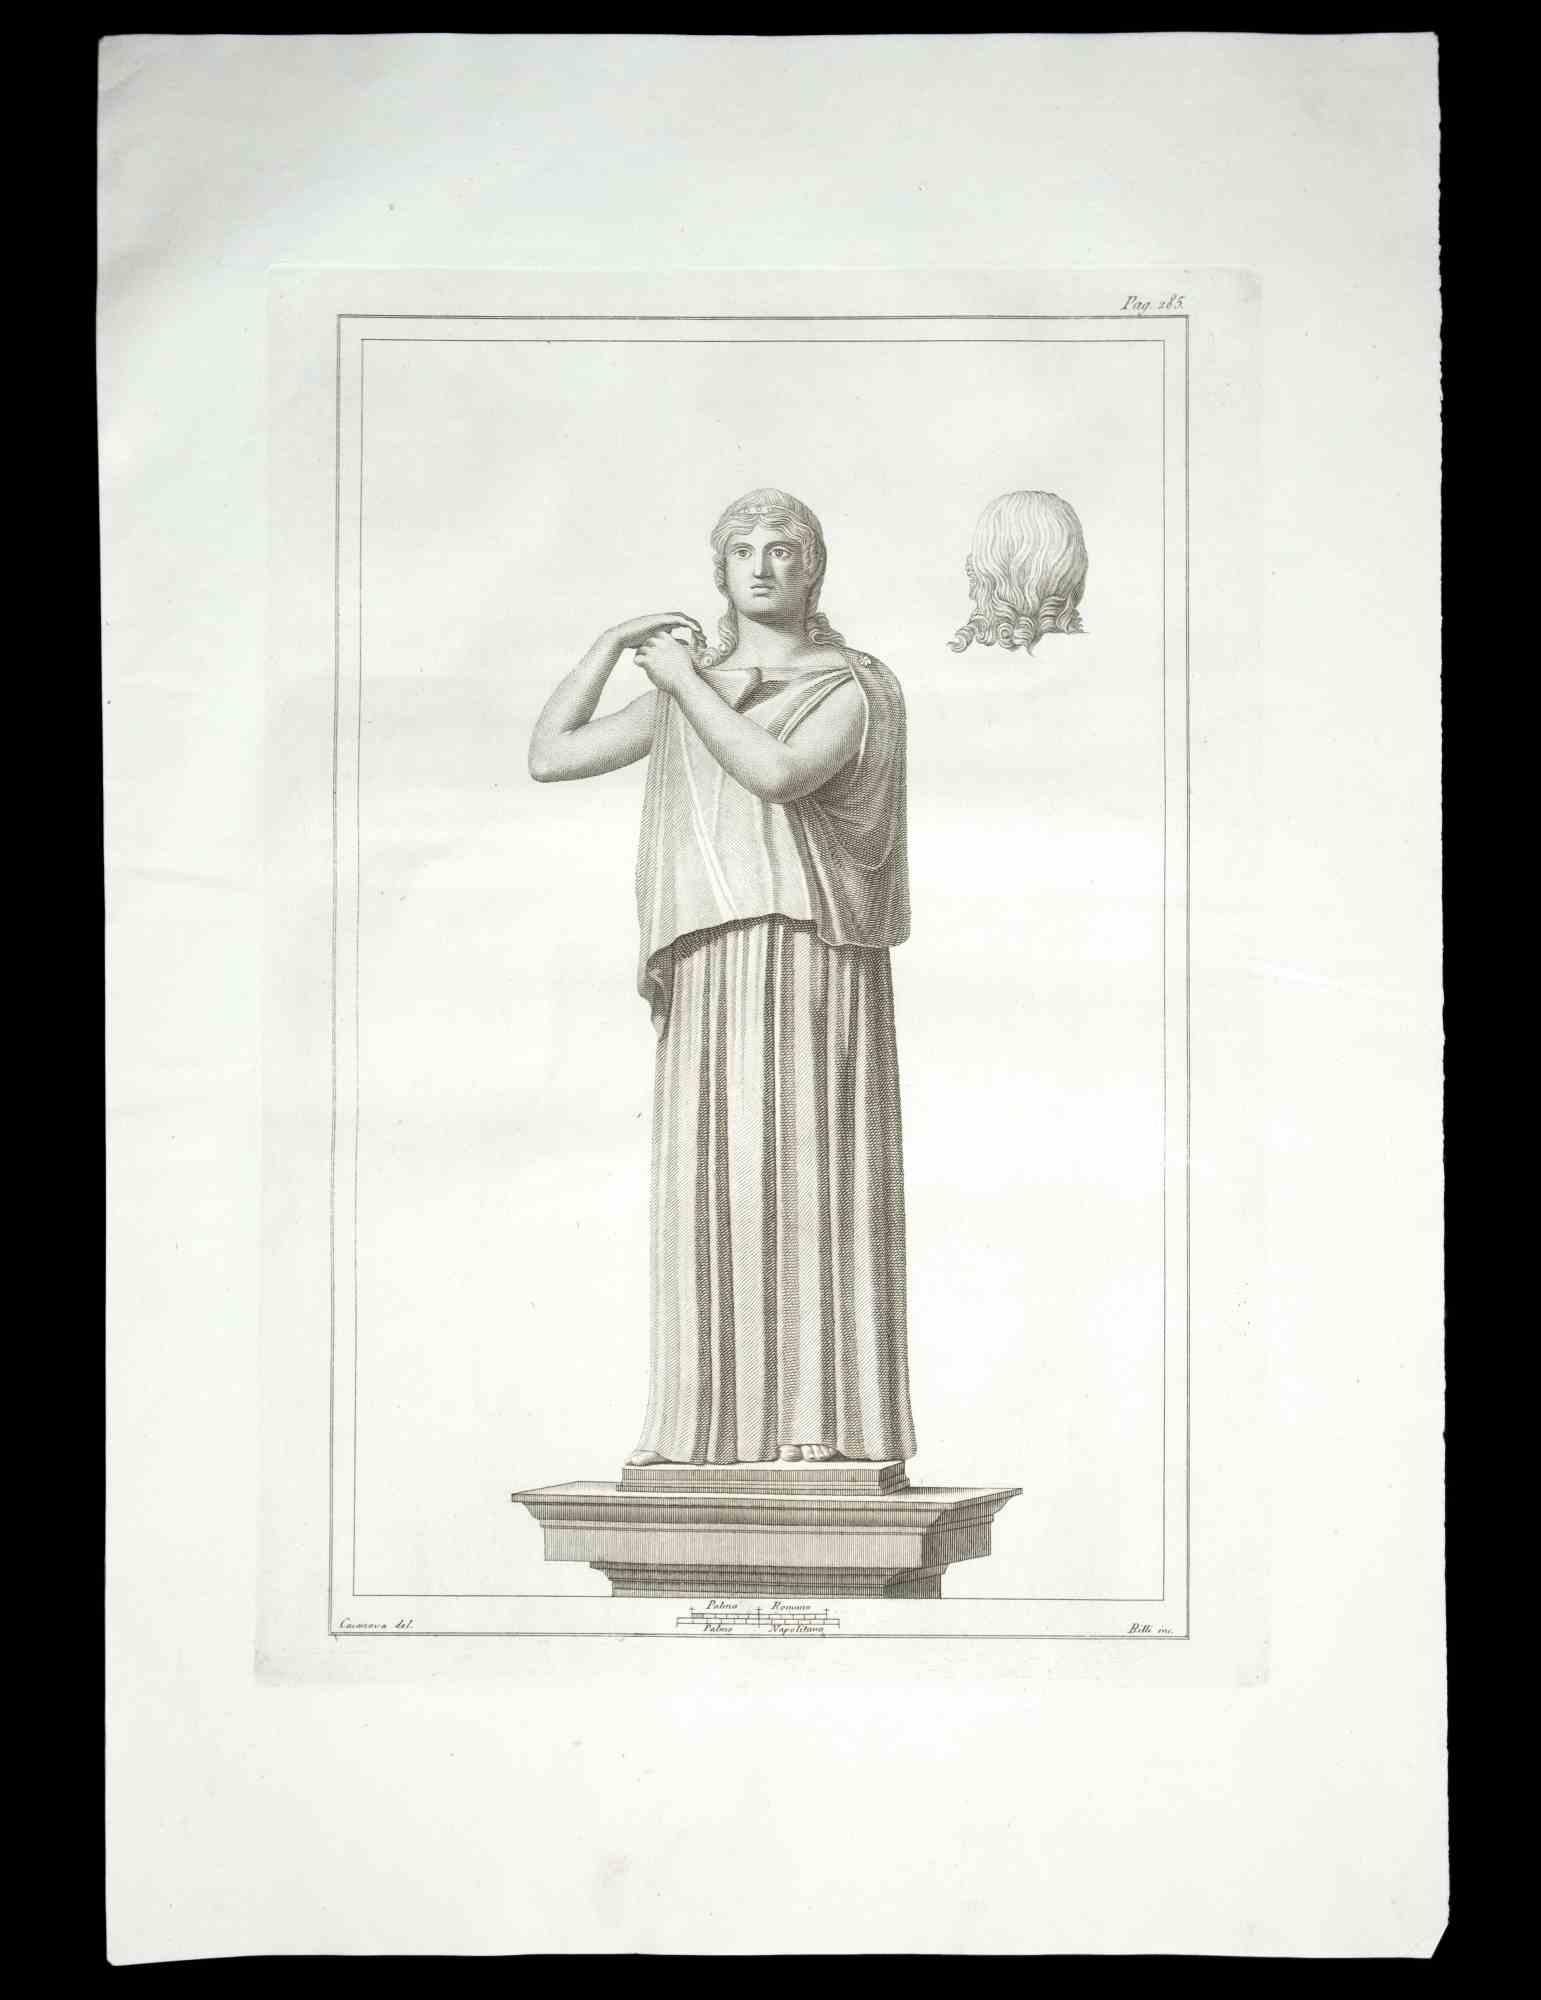 Ancient Roman Statue, from the series "Antiquities of Herculaneum", is an original etching on paper realized by Casanova in the 18th century.

Signed on the plate, on the lower left.

Good conditions with slight foxing.

The etching belongs to the